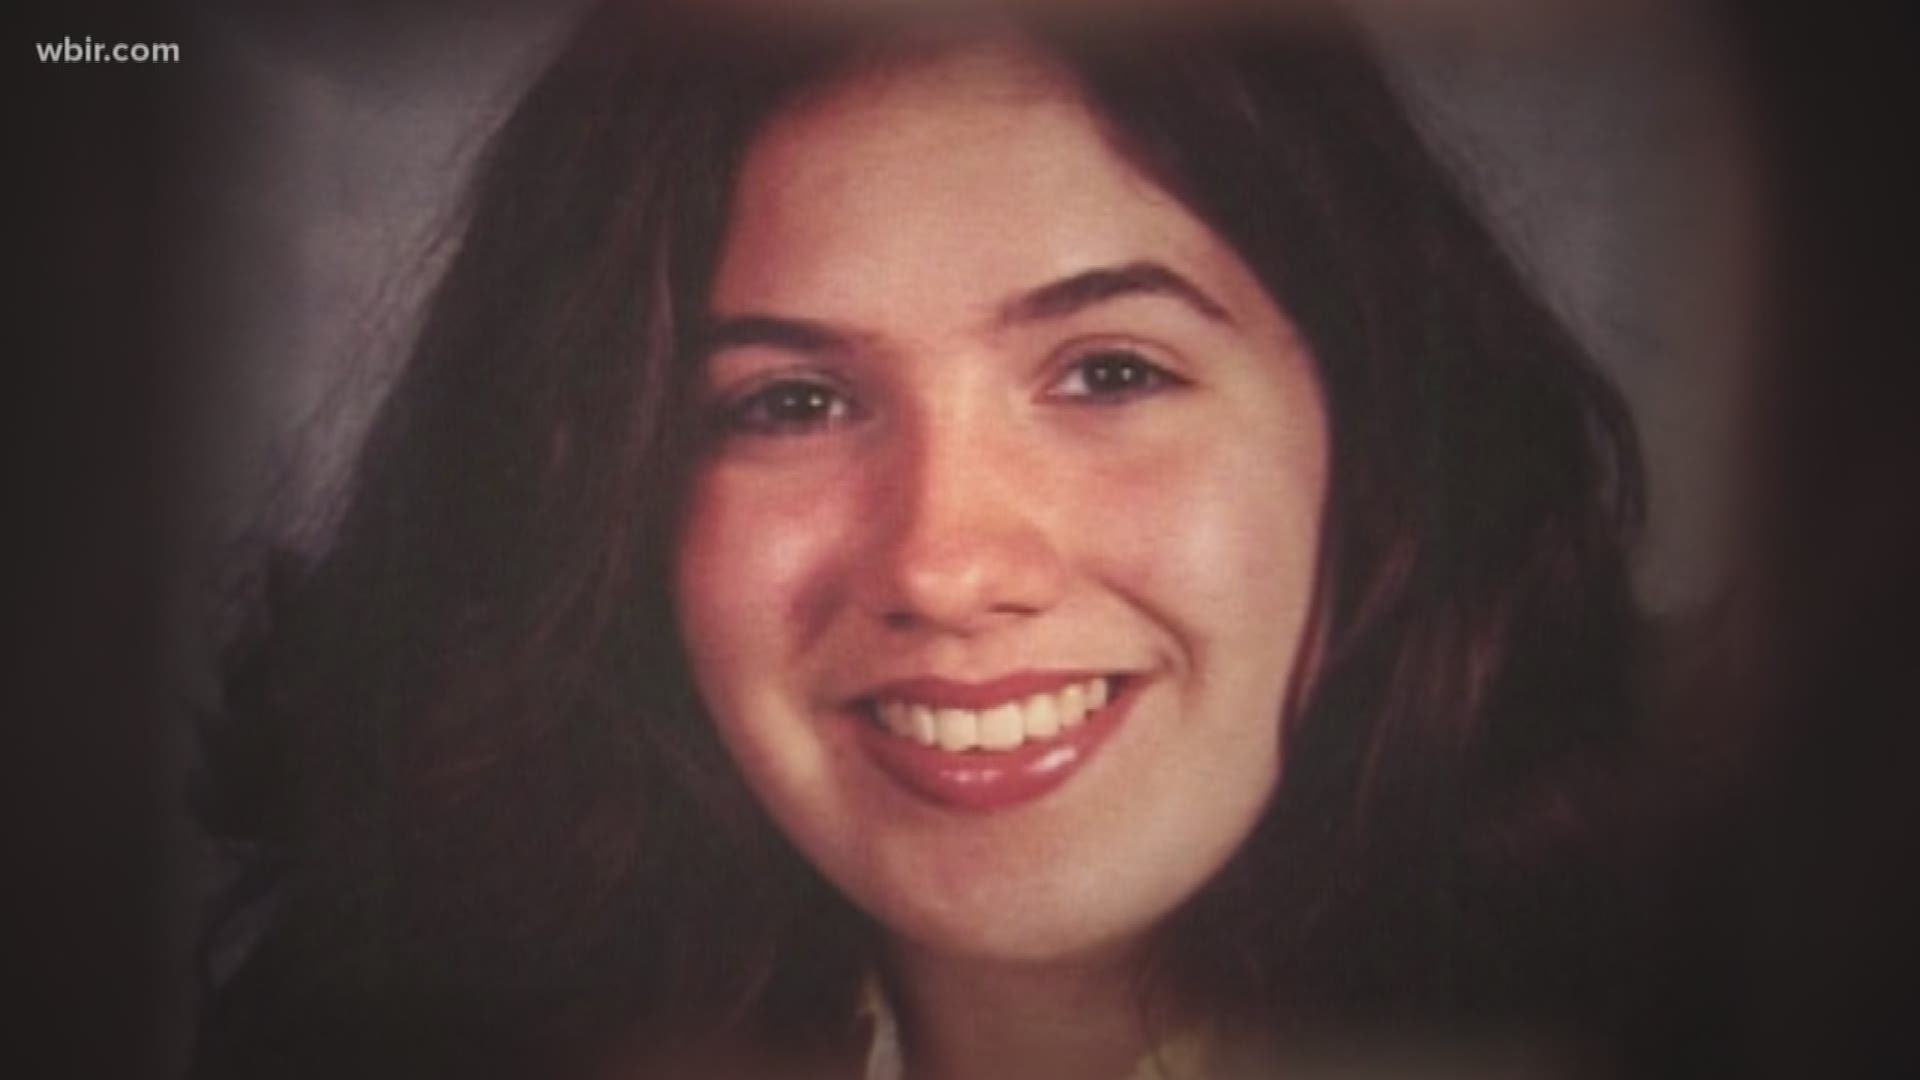 As an East Tennessee cold case approaches a decade left unsolved, investigators are recounting the night that a young woman lost her life in hopes of generating fresh tips.